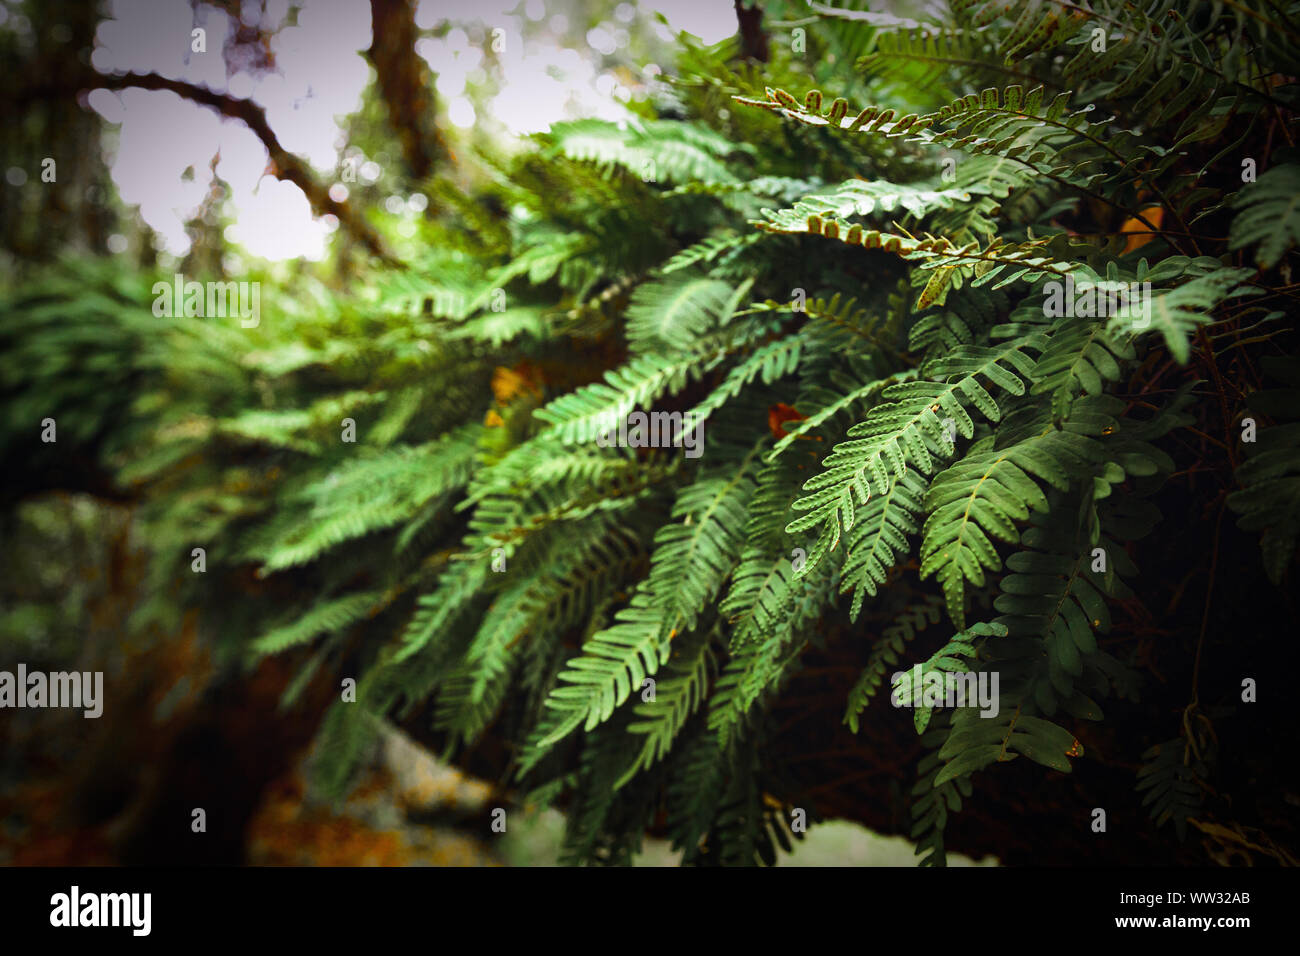 Ferns growing on a tree in a state park near Hudson, Florida Stock Photo